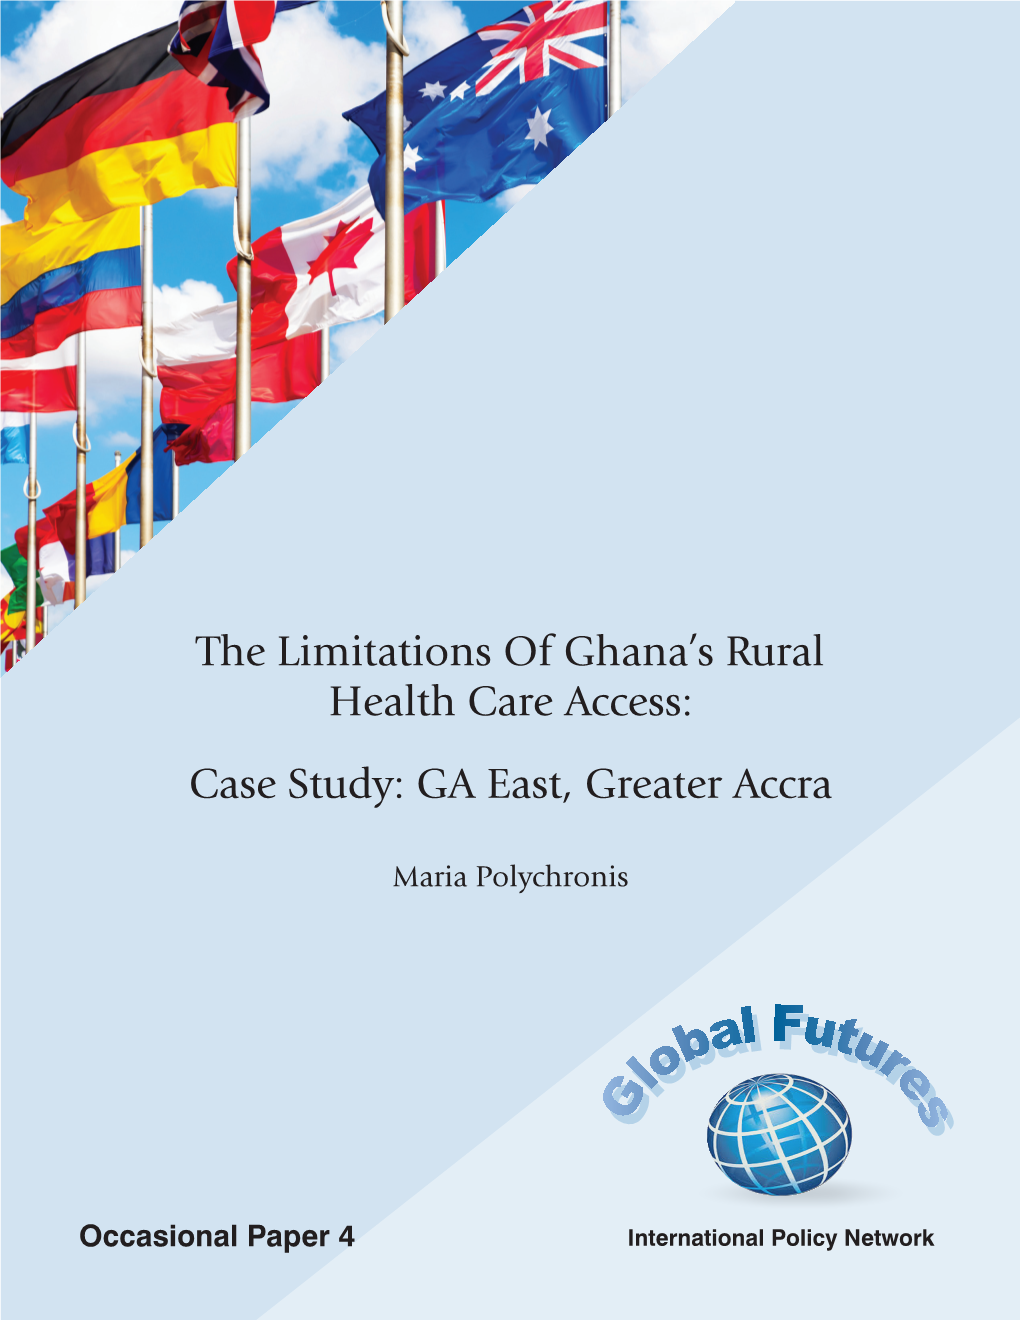 The Limitations of Ghana's Rural Health Care Access: Case Study